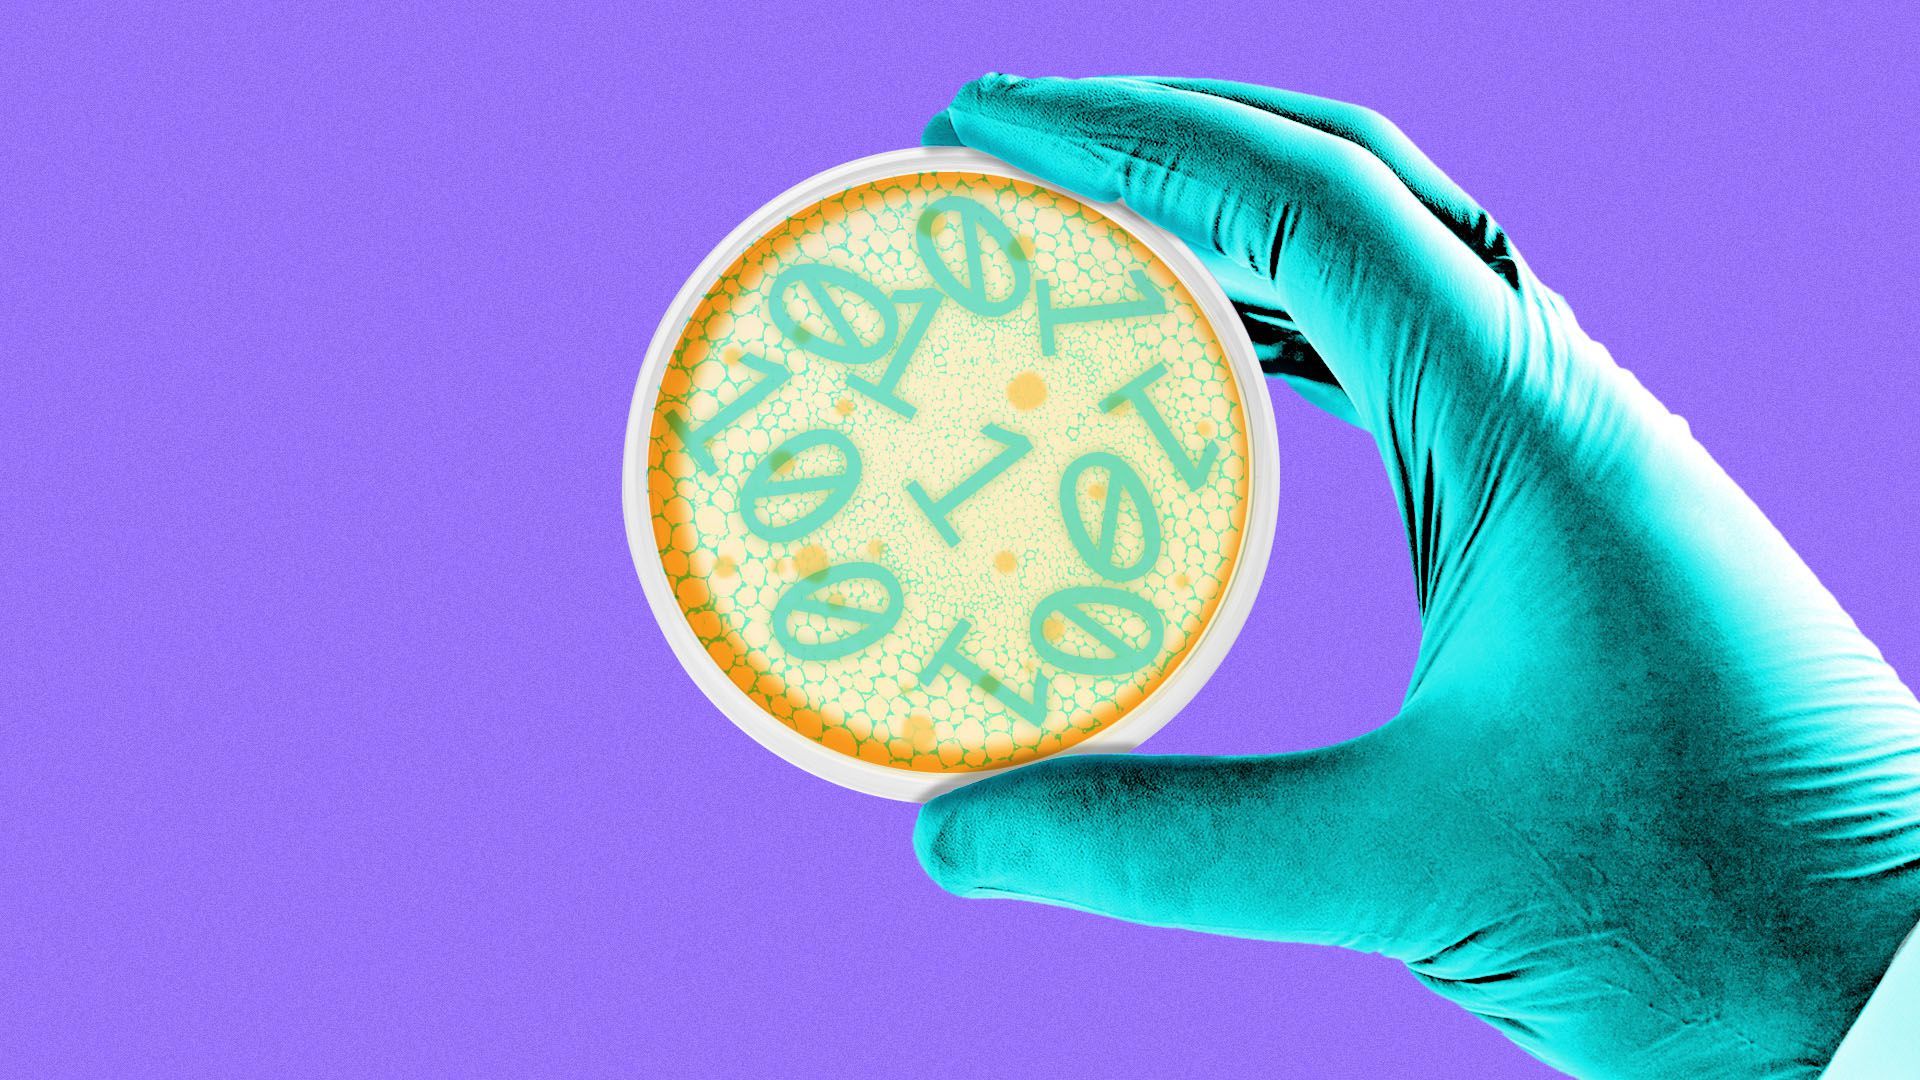 Illustration of a scientist holding a petri dish full of binary code